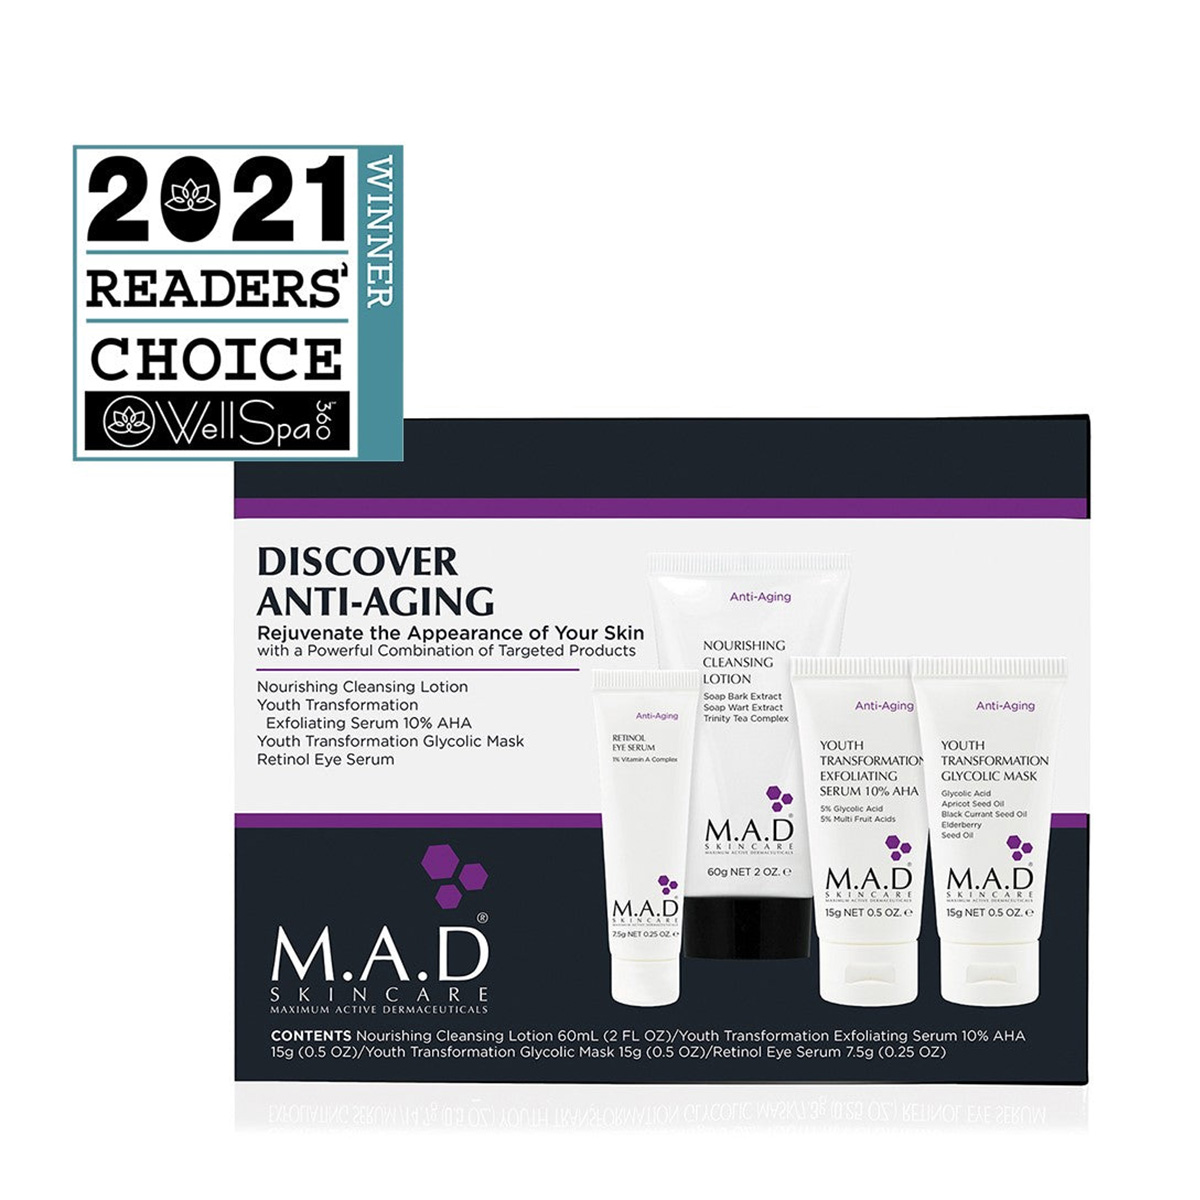 DISCOVER ANTI-AGING